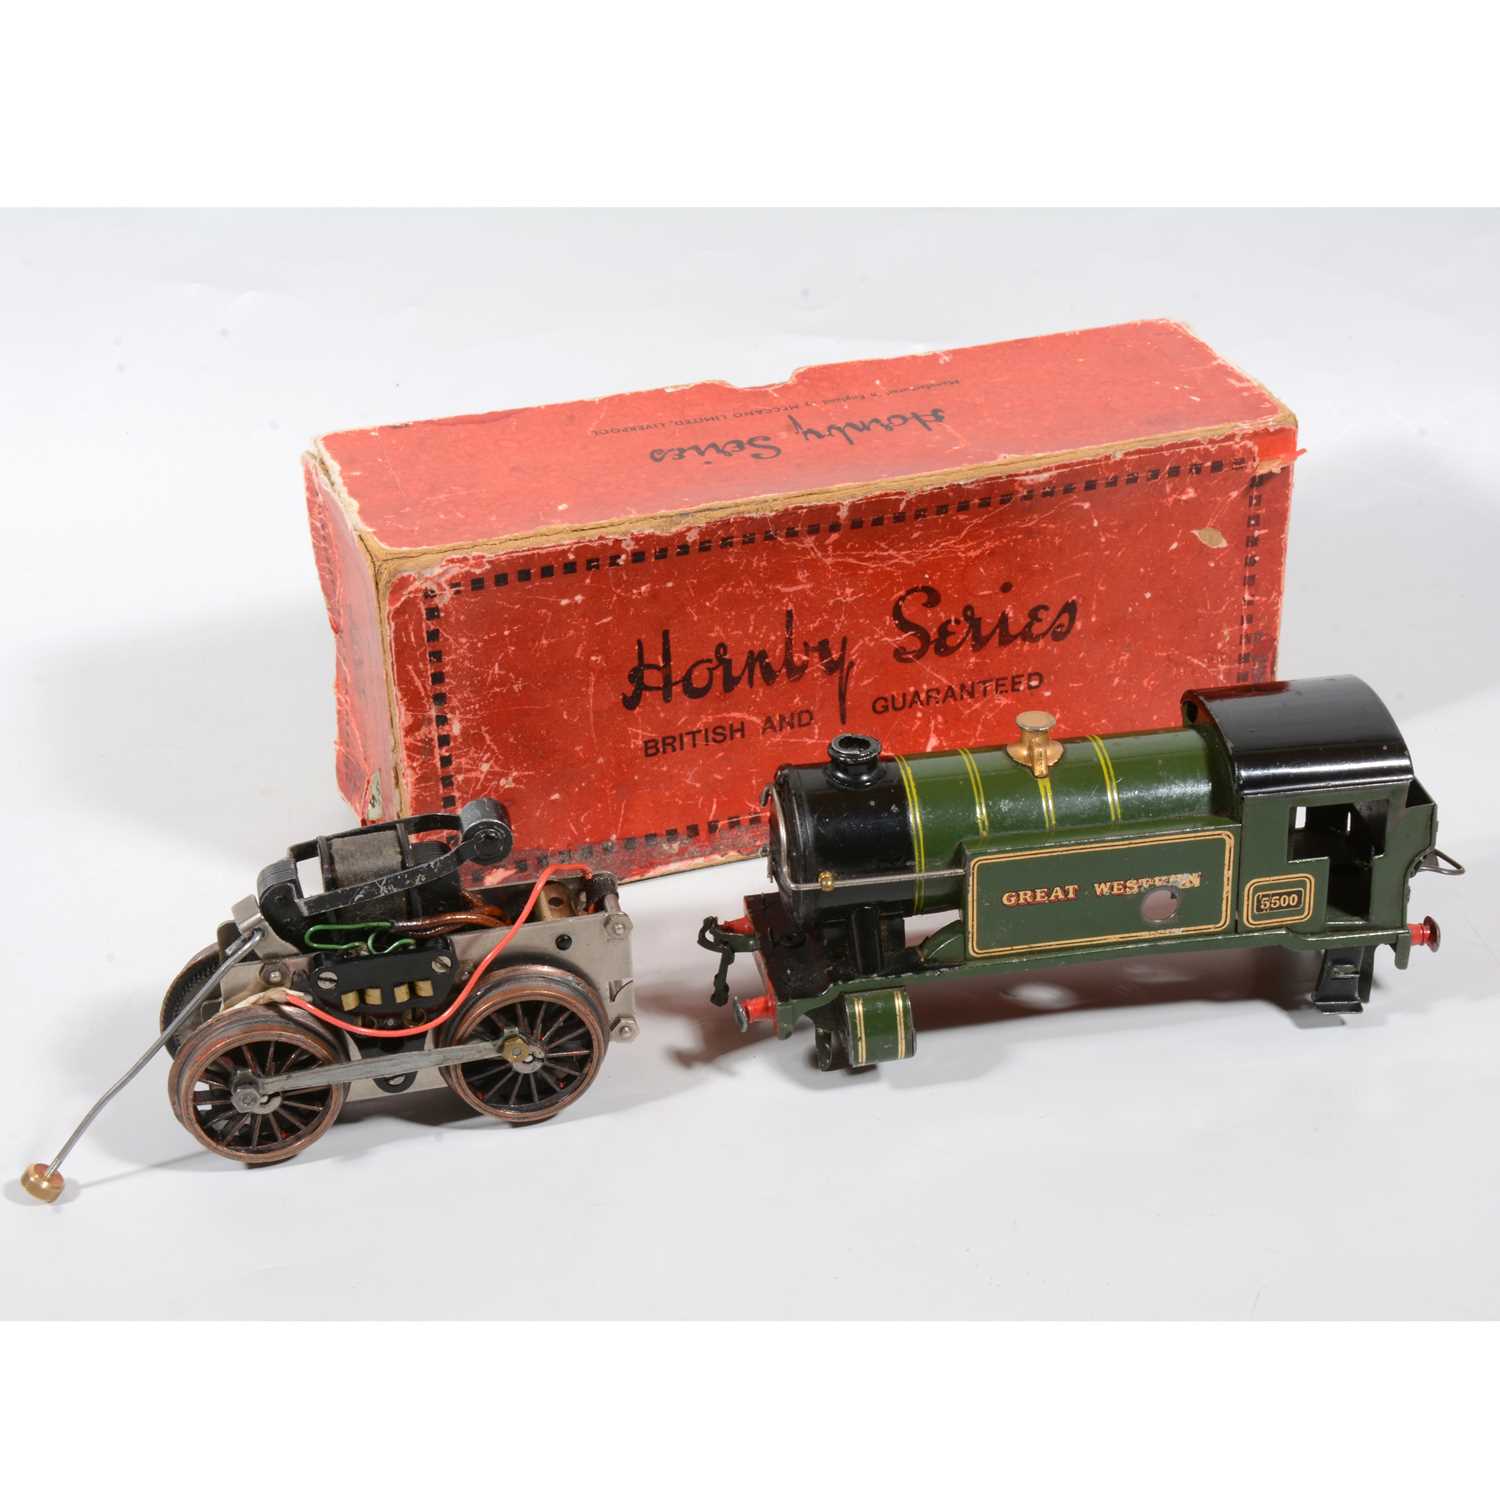 Lot 33 - Hornby O gauge 20v motor and chassis and body shell for no.1 Special tank locomotive GW 5500